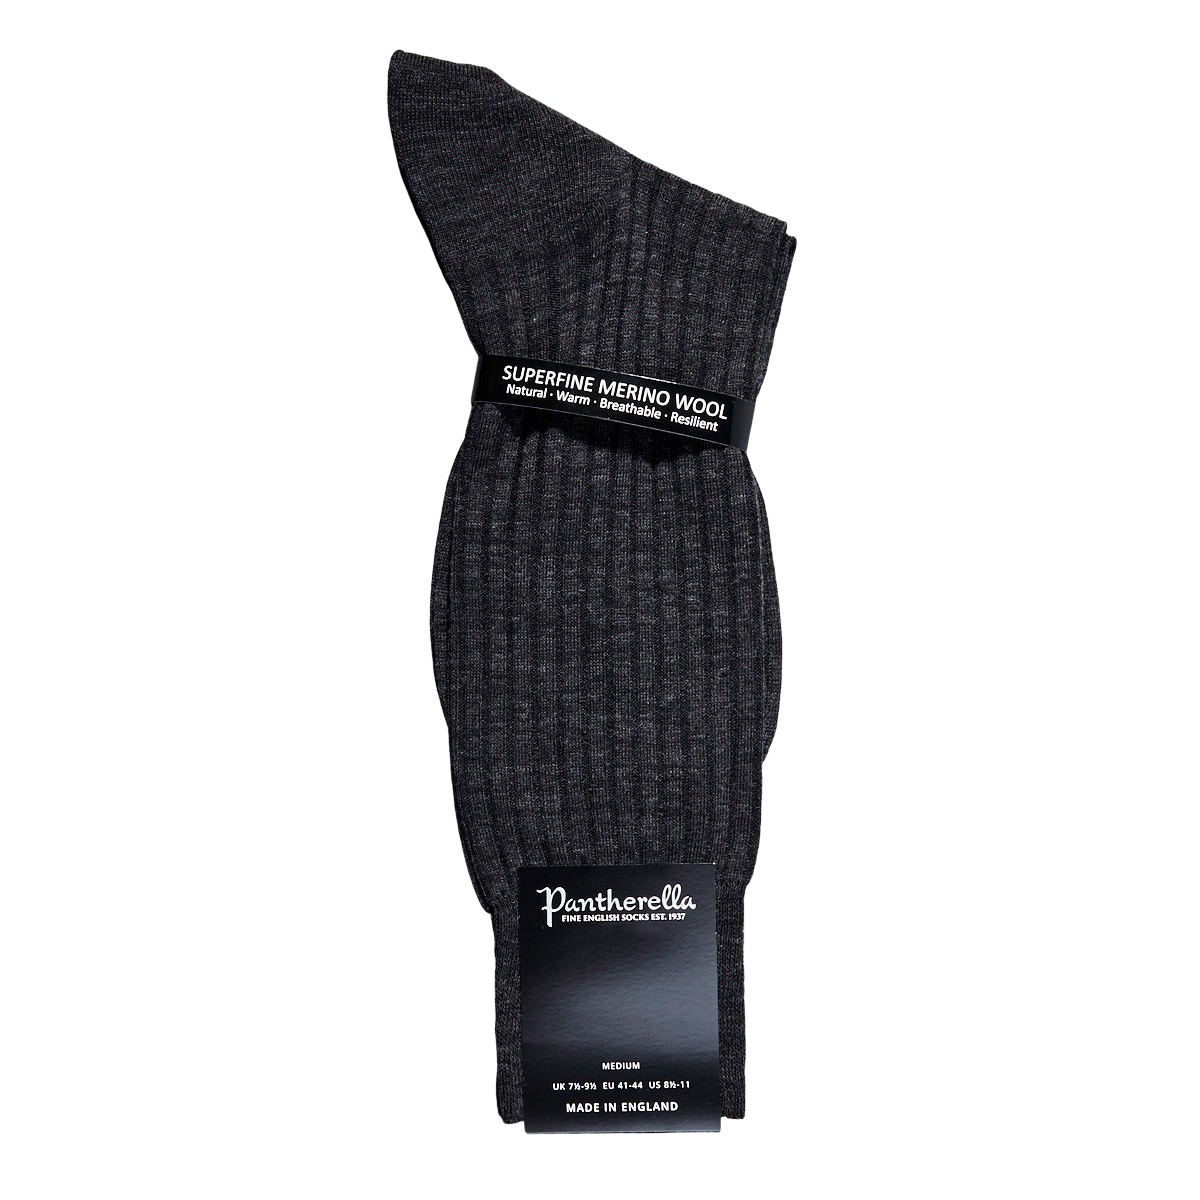 A pair of Pantherella Charcoal Merino Wool Ribbed Ankle Socks with a label on them.